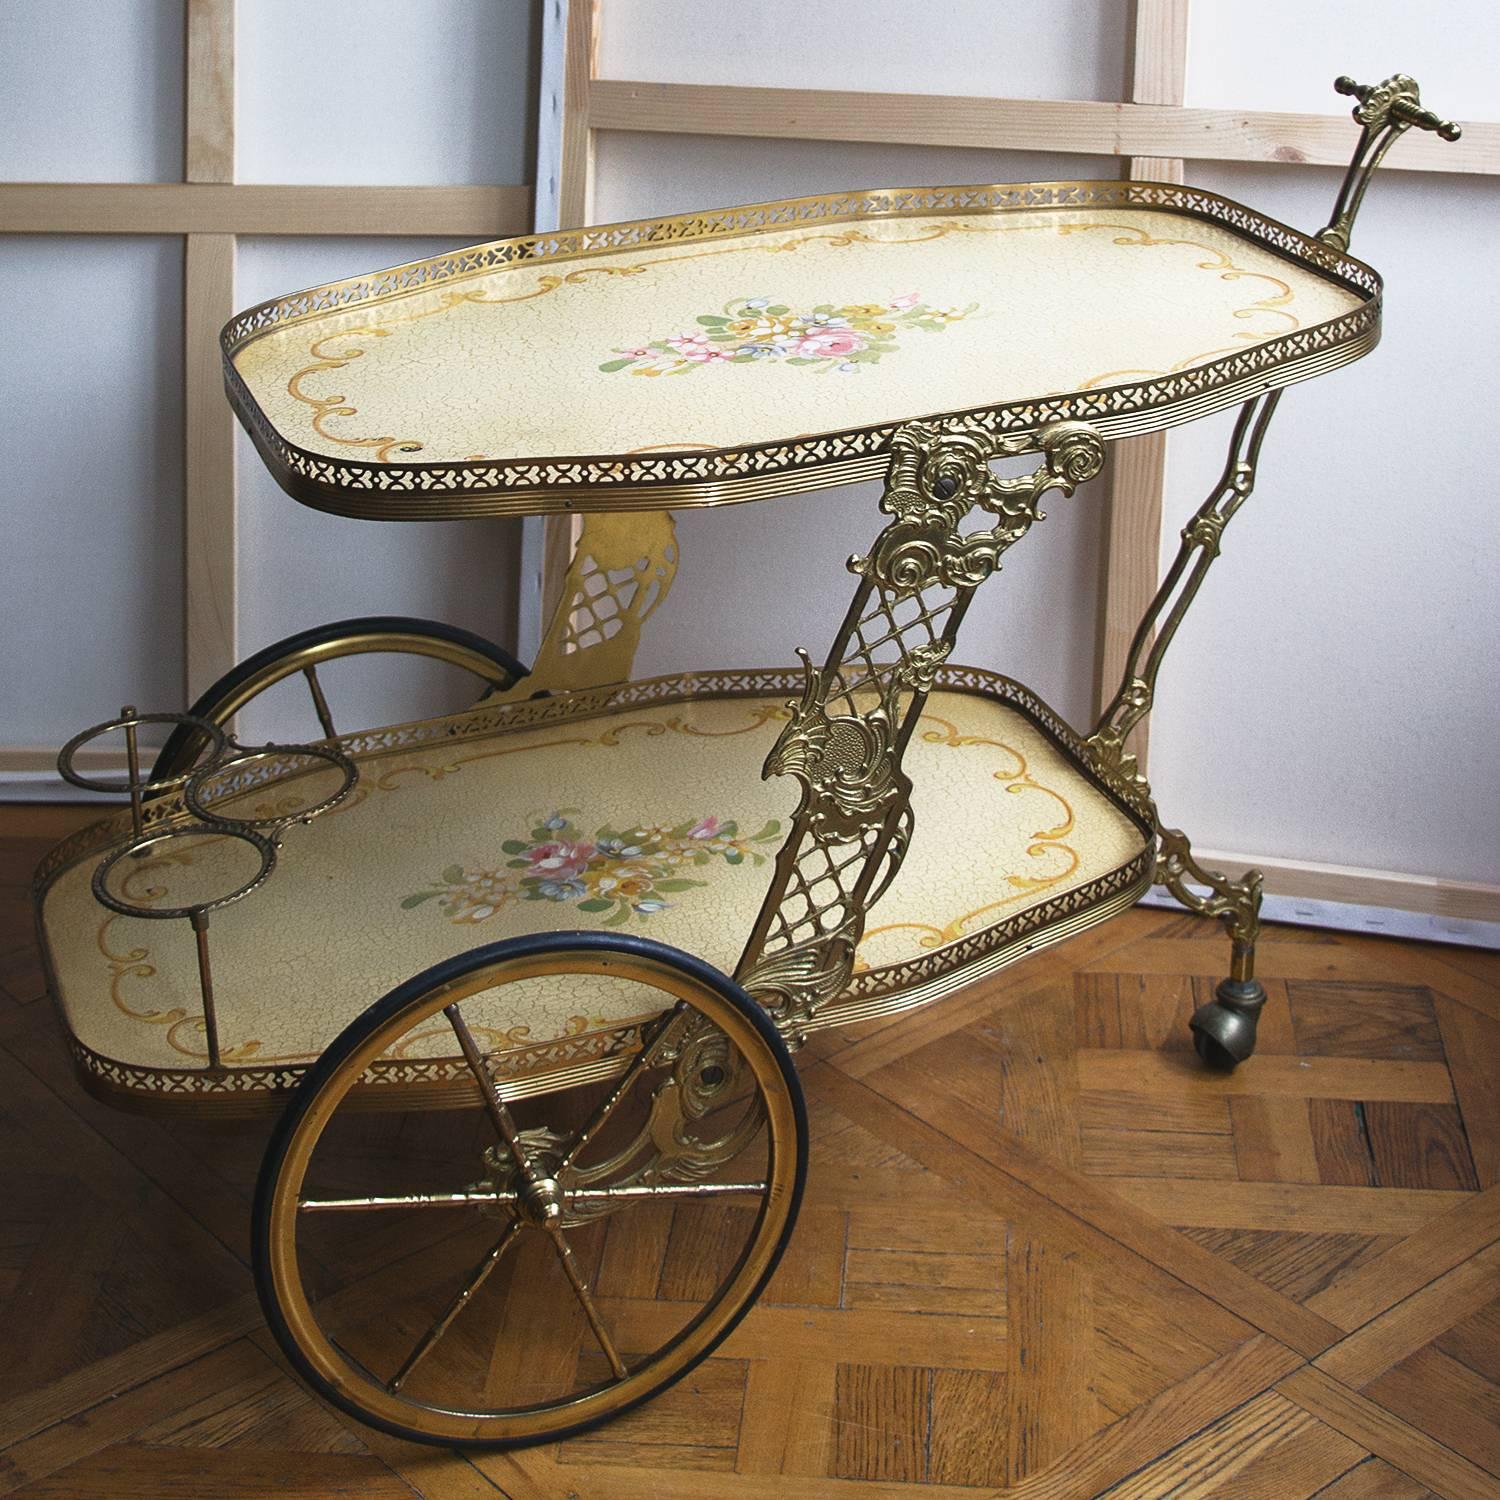 Stunning exquisite French Provence style painted wood with decorative craquelure and brass antique rolling bar cart
Very rare design
Excellent condition (please see all photos)


Measurements:
Height: 60 cm / 23.6 inches 
Full length: 78 cm /